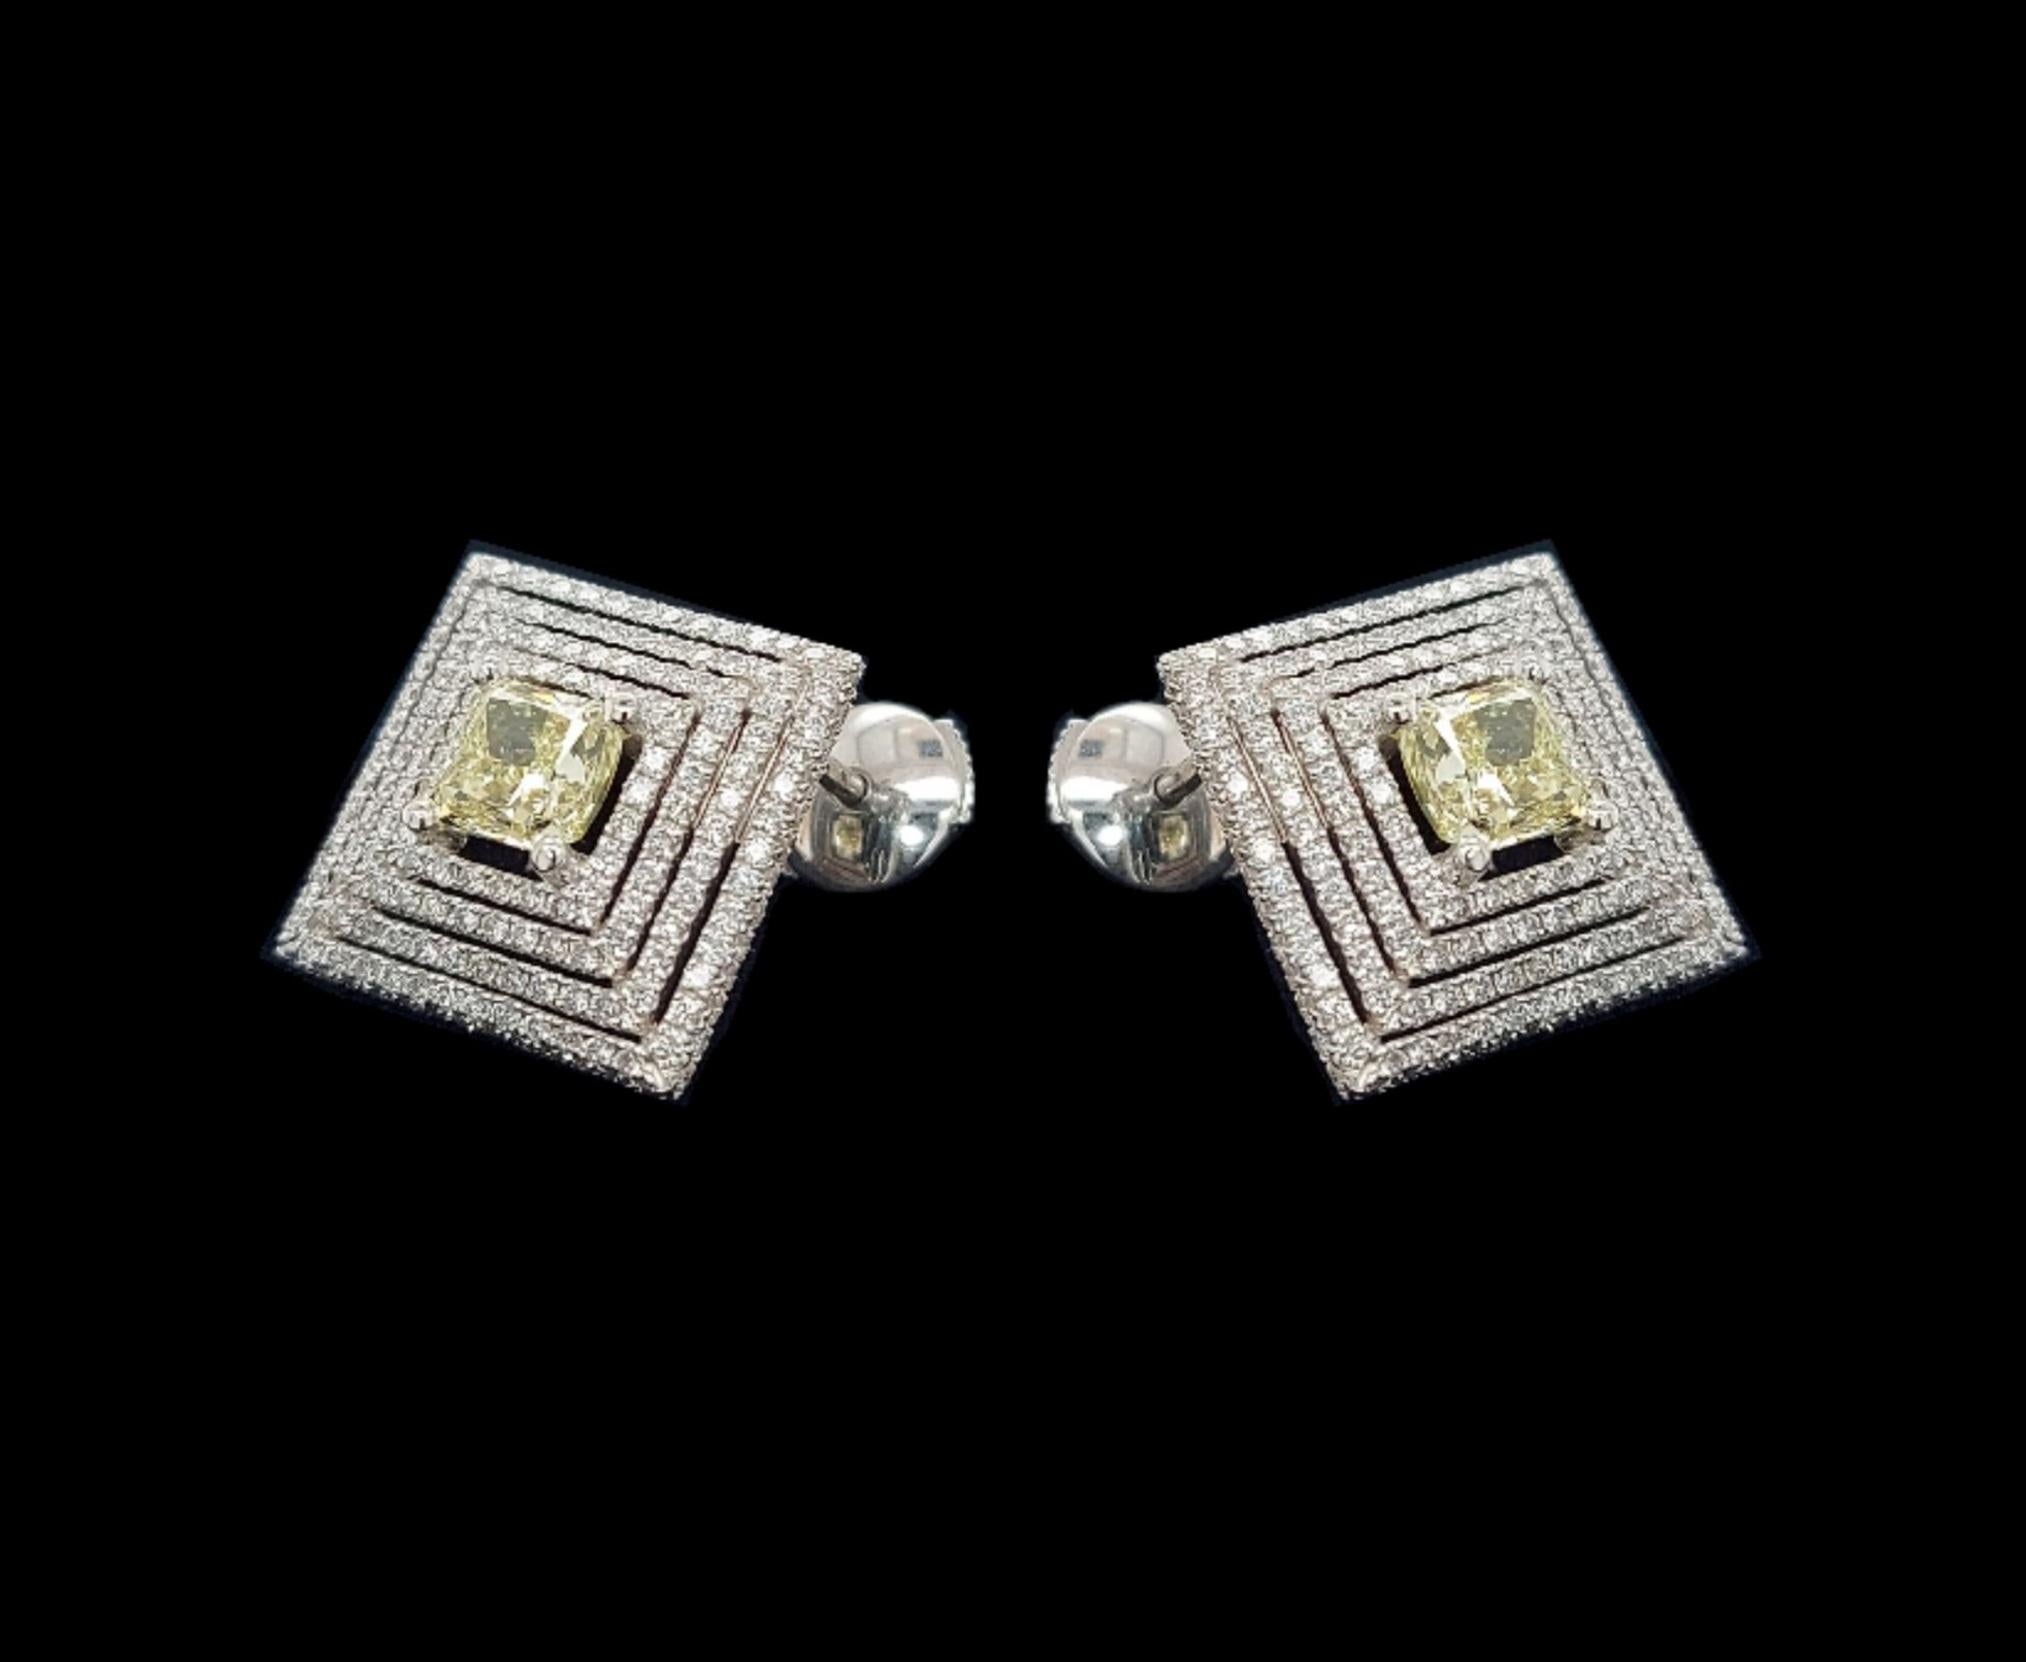 WHITE GOLDEN EARRINGS WITH FANCY YELLOW CENTER DIAMOND AND WHITE BRILLIANT CUT DIAMONDS

MATERIAL: 18 kt white gold

SIZE: 16 mm

WEIGHT: 6.6 grams / 4.2 dwt / 0.234 oz 

DIAMONDS: small brilliant cut diamonds together ca. 1.66 cts, 2 princess cut